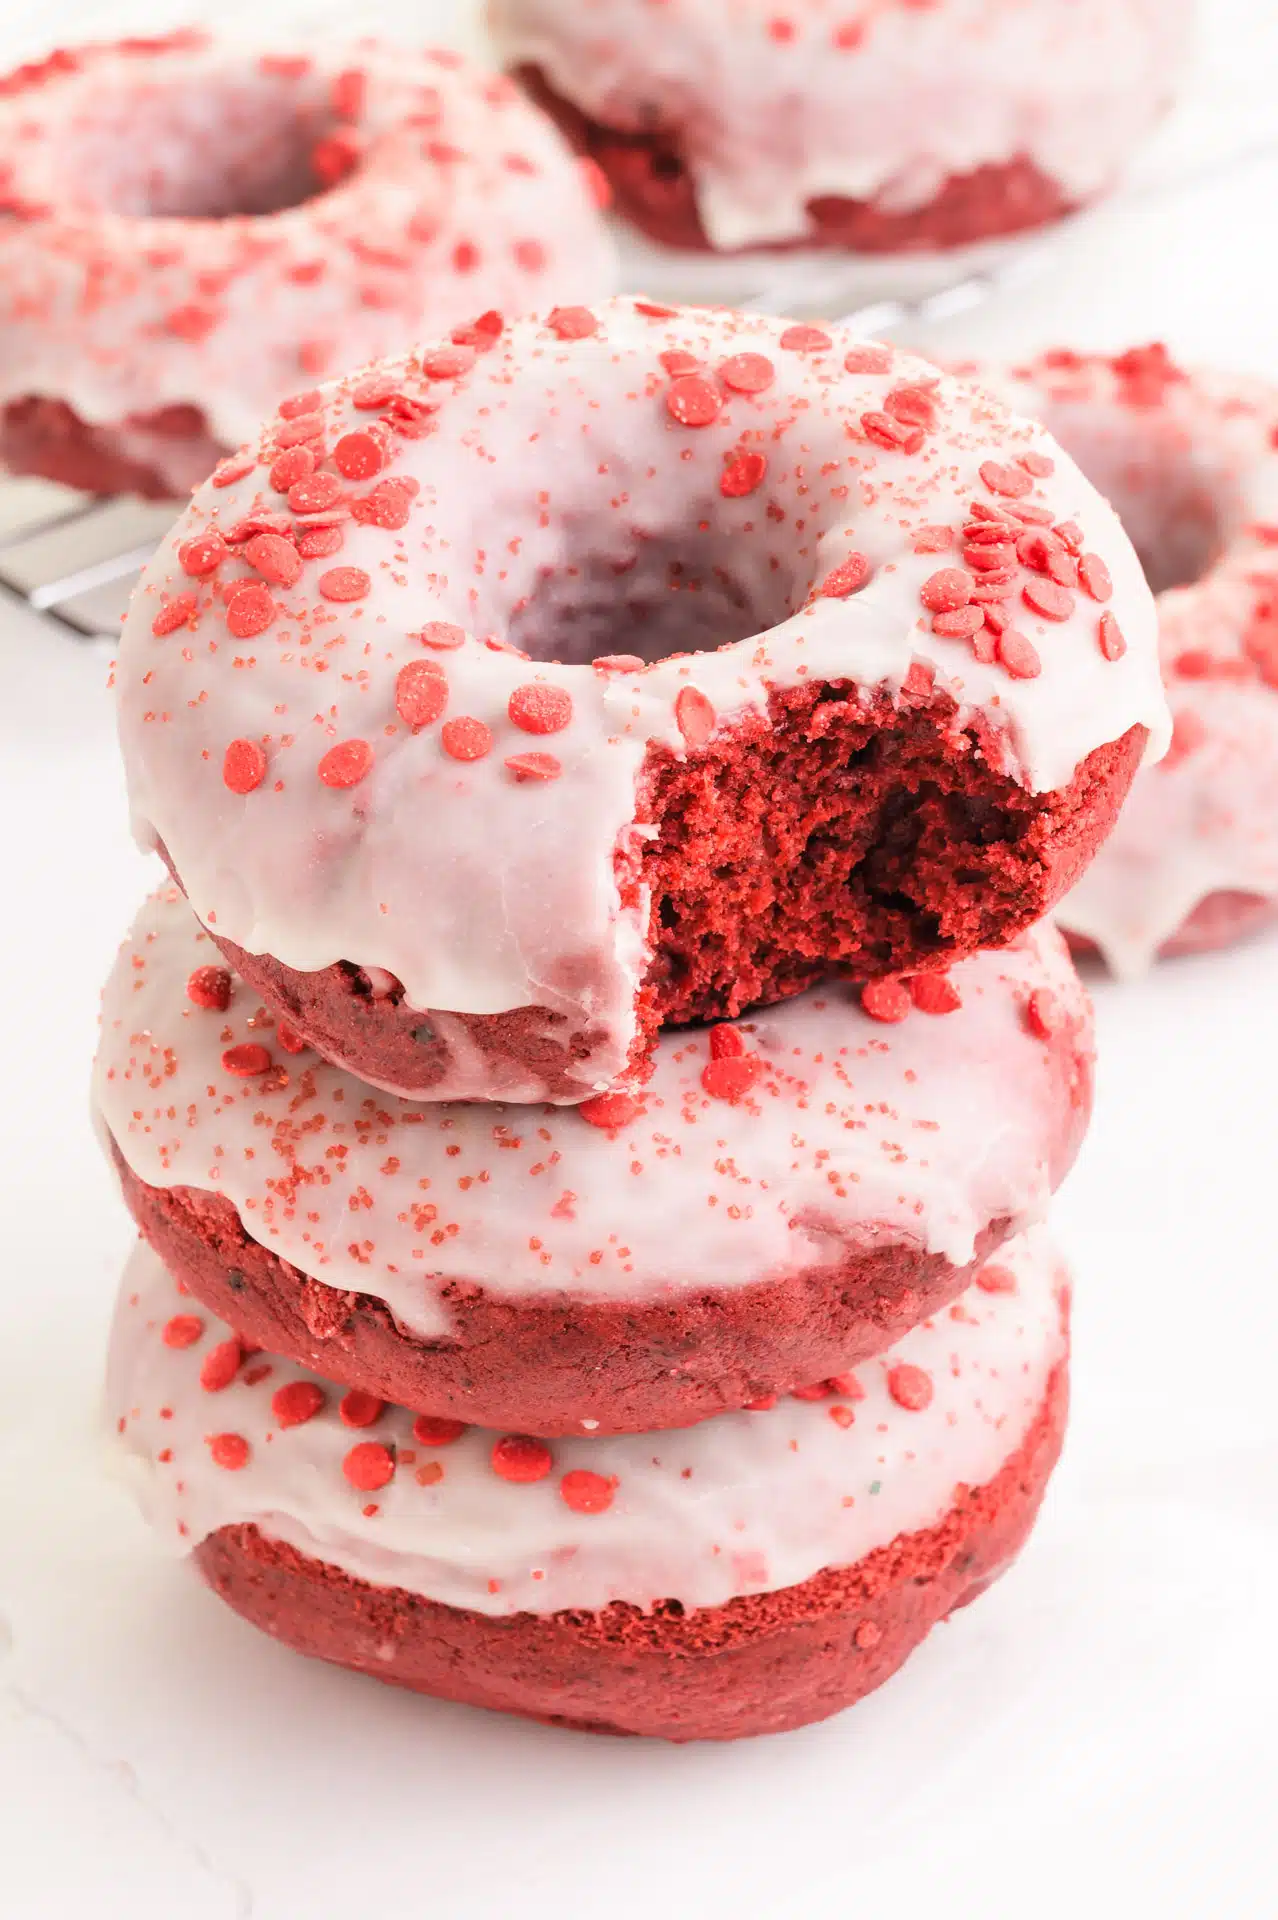 A stack of red velvet donuts shows the top one with a bite taken out.